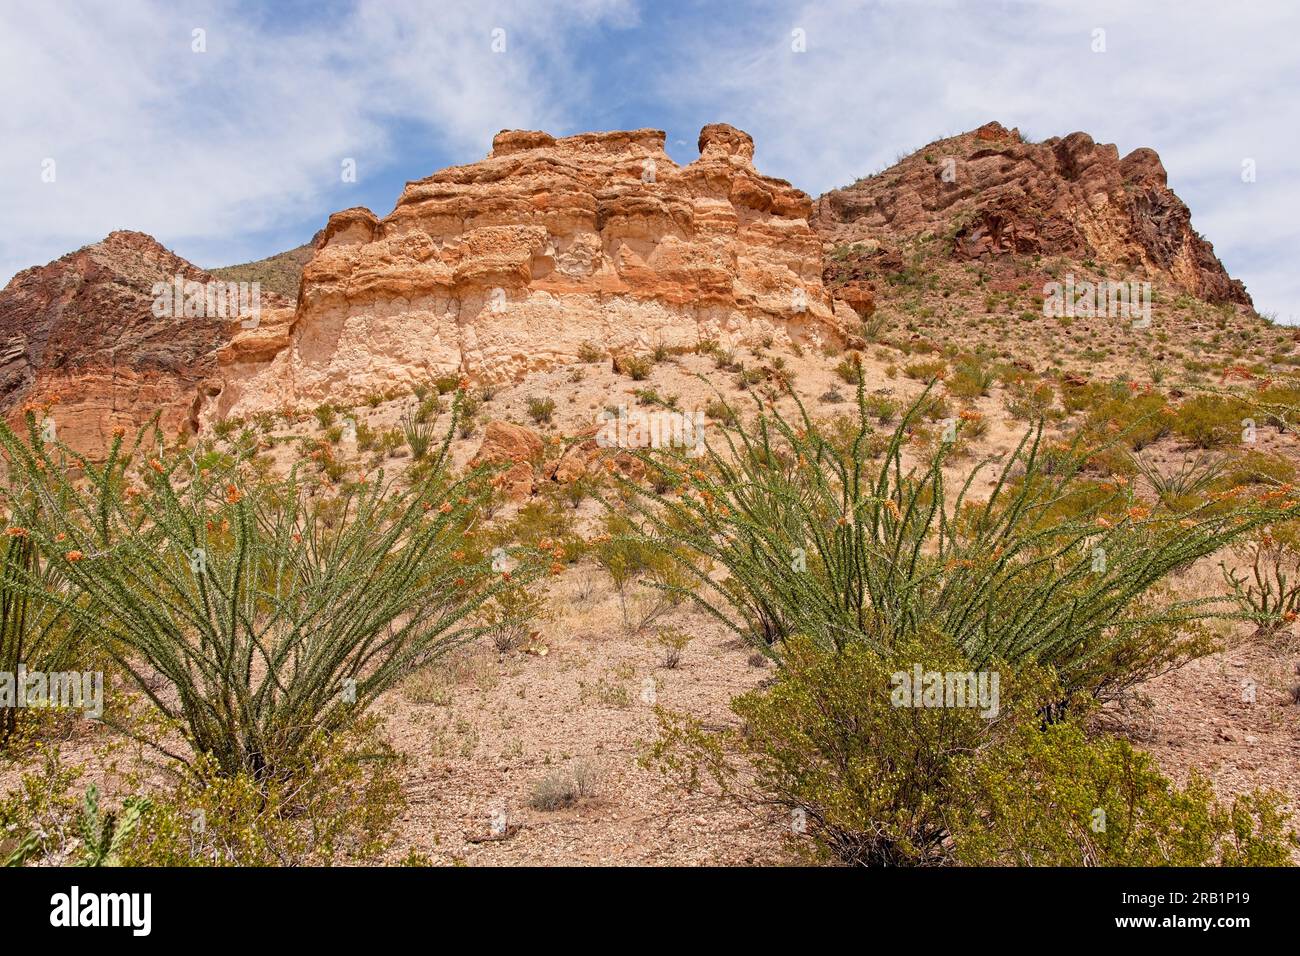 Ocotillo cactus stand before eroding mesa in Chihuahuan desert of Big Bend National Park Stock Photo